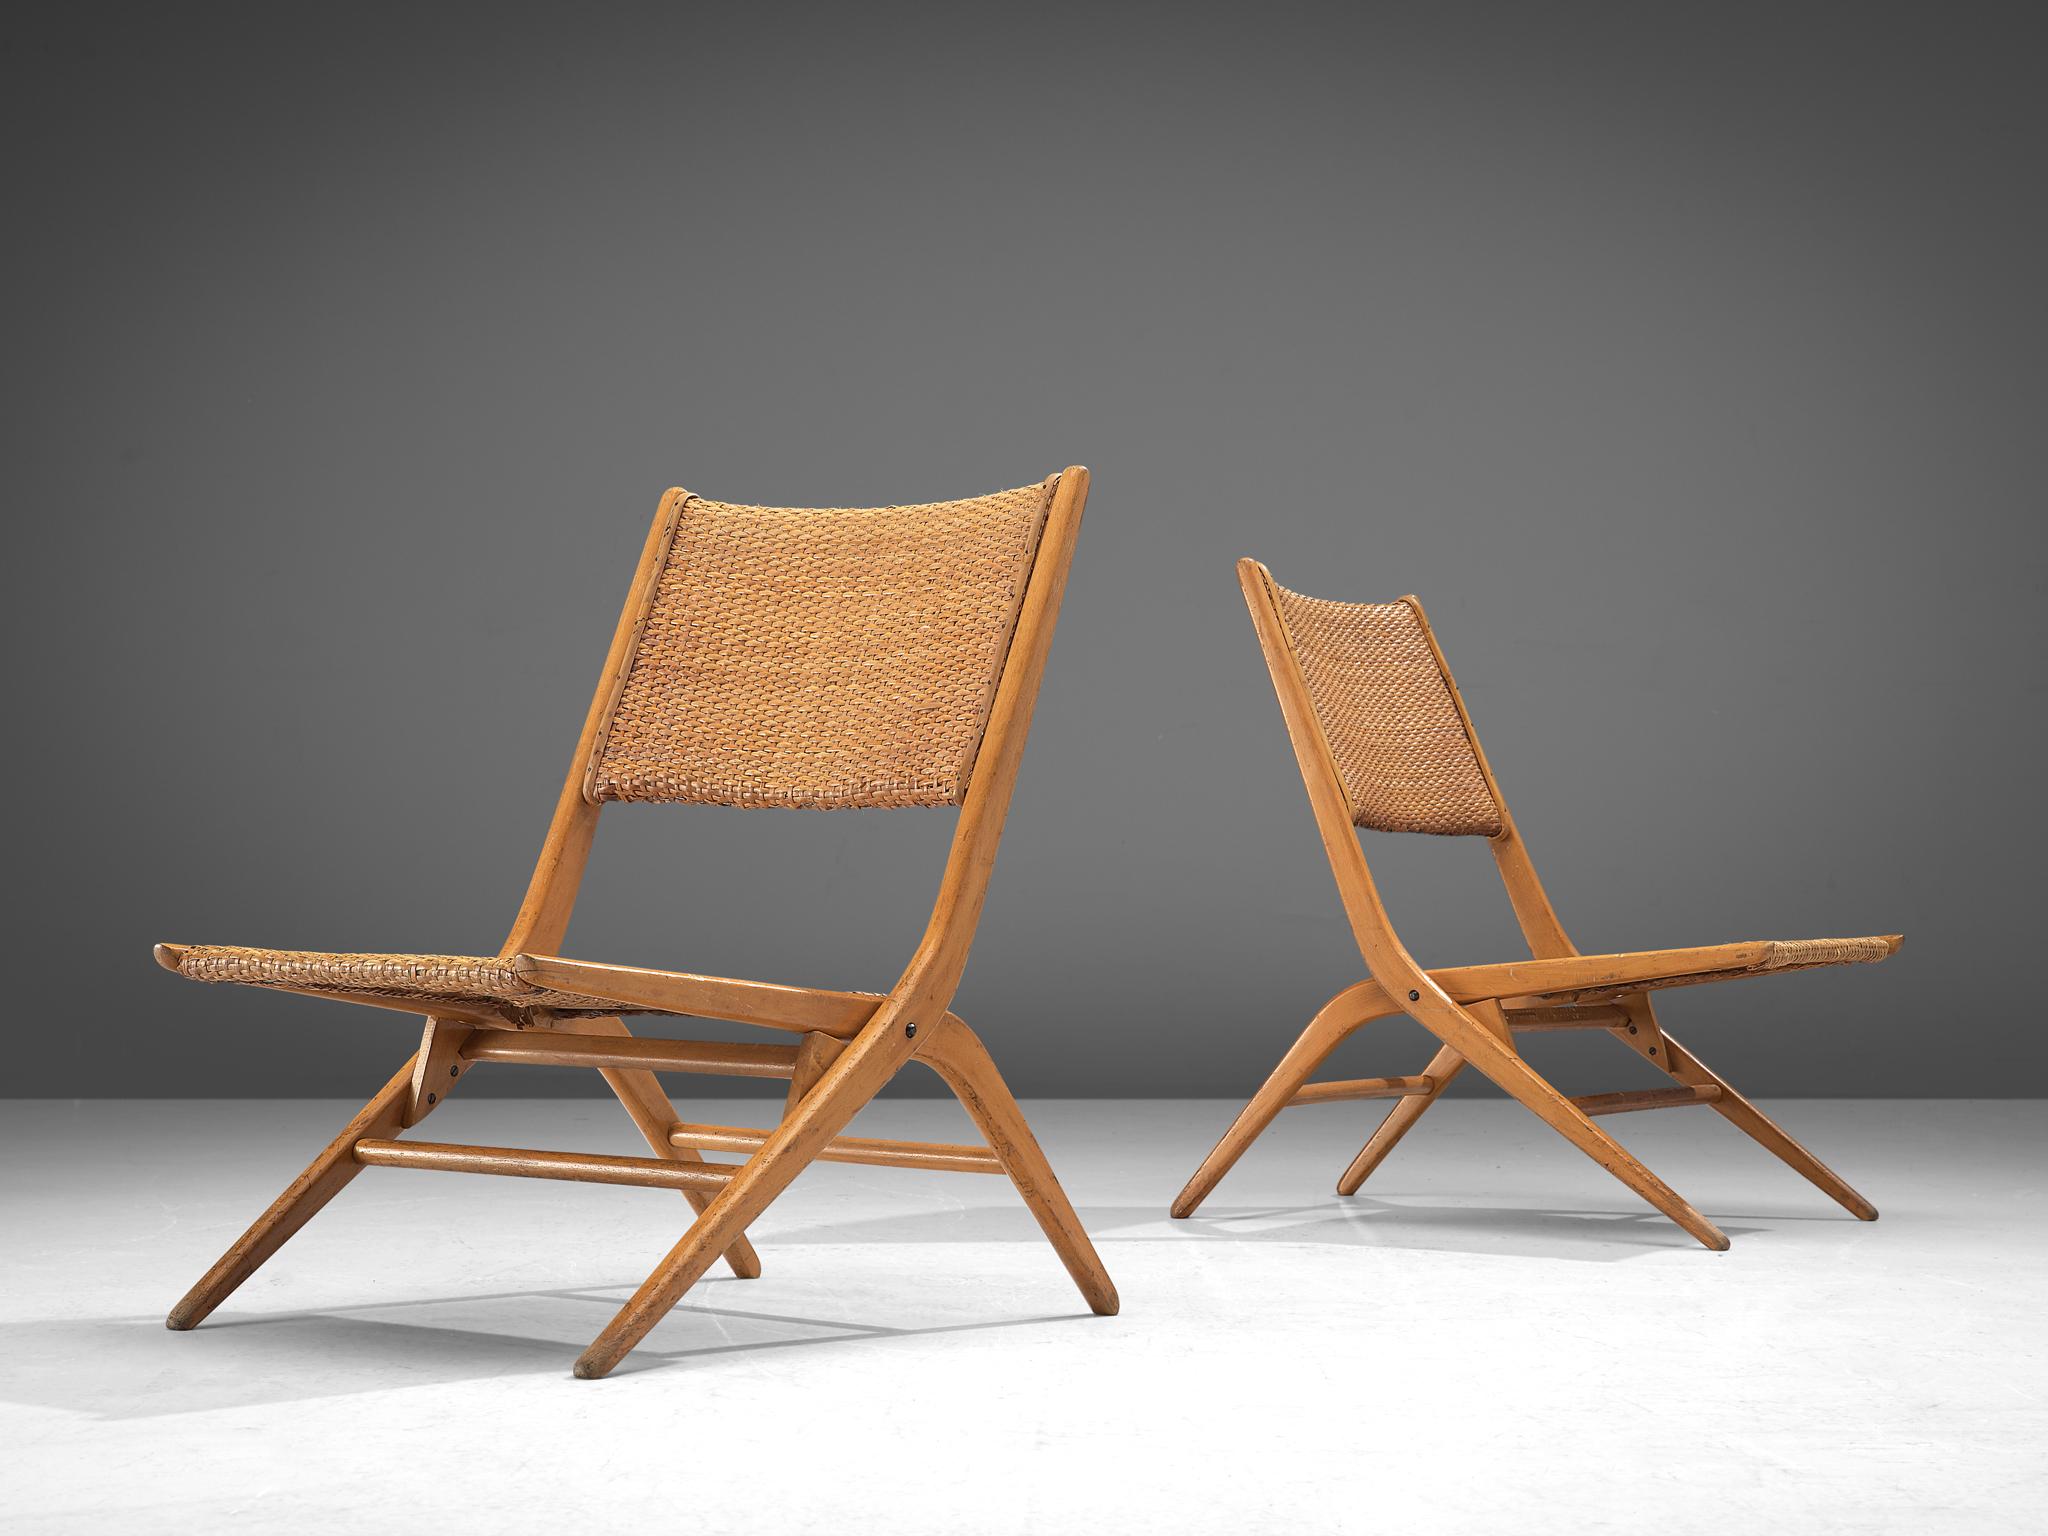 Pair of folding slipper chairs, cane and beech, Italy, 1960s

Elegant French folding chairs made of beech and cane. The beech wooden frame is designed with high attention to detail as seen in the openings, curves and lines. Wonderful chairs that